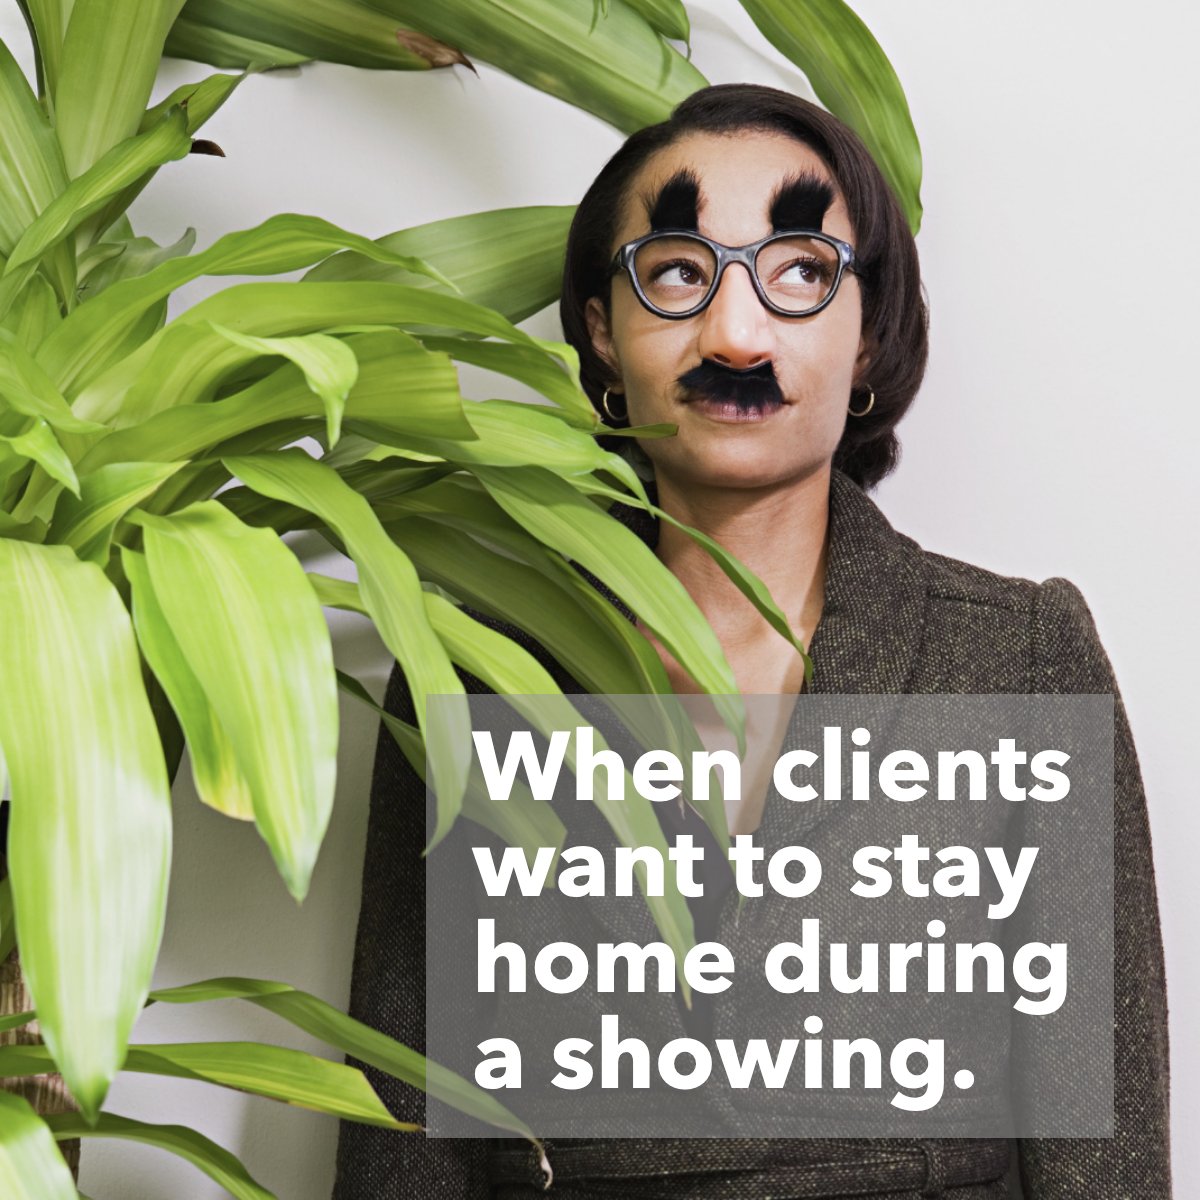 Clients be like, Incognito mode: ON 🕵 🦸‍♂️

#realestatehumor #realestatejokes #incognito #showing #clients #openhouse
 #AmericasMortgageSolutions #christianpenner #onestopbrokershop #mortgagebrokerwestpalmbeach #epicrealeststedeals